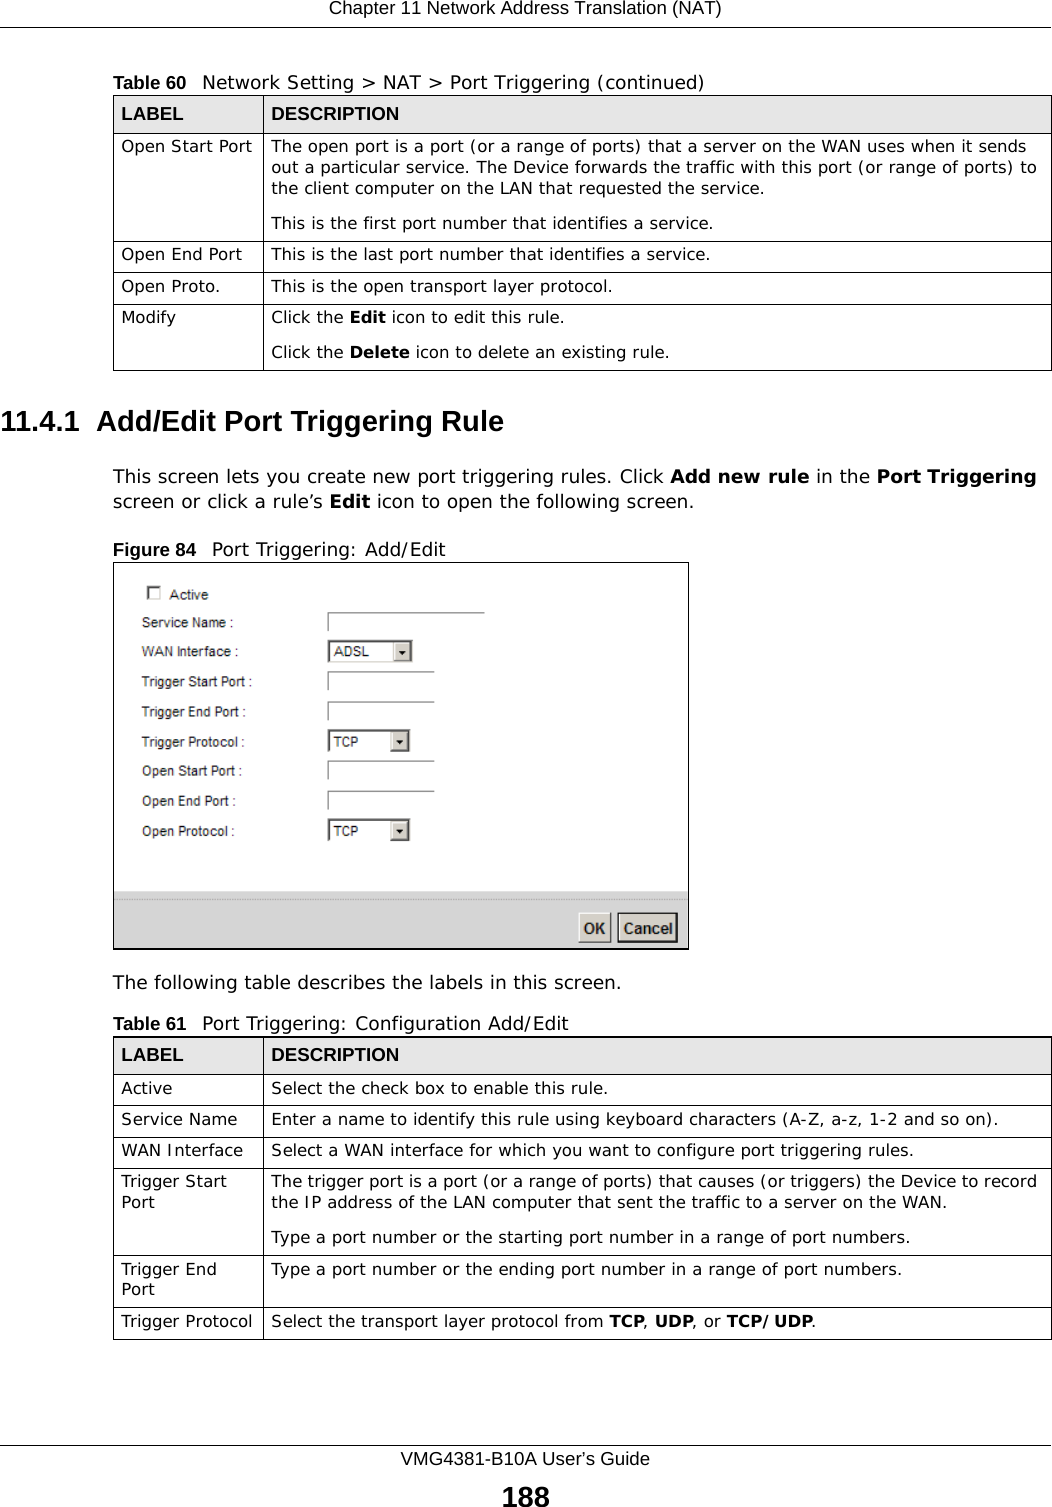 Chapter 11 Network Address Translation (NAT)VMG4381-B10A User’s Guide18811.4.1  Add/Edit Port Triggering Rule This screen lets you create new port triggering rules. Click Add new rule in the Port Triggering screen or click a rule’s Edit icon to open the following screen.Figure 84   Port Triggering: Add/Edit The following table describes the labels in this screen. Open Start Port The open port is a port (or a range of ports) that a server on the WAN uses when it sends out a particular service. The Device forwards the traffic with this port (or range of ports) to the client computer on the LAN that requested the service. This is the first port number that identifies a service.Open End Port This is the last port number that identifies a service.Open Proto. This is the open transport layer protocol.Modify Click the Edit icon to edit this rule.Click the Delete icon to delete an existing rule. Table 60   Network Setting &gt; NAT &gt; Port Triggering (continued)LABEL DESCRIPTIONTable 61   Port Triggering: Configuration Add/EditLABEL DESCRIPTIONActive Select the check box to enable this rule.Service Name Enter a name to identify this rule using keyboard characters (A-Z, a-z, 1-2 and so on). WAN Interface Select a WAN interface for which you want to configure port triggering rules.Trigger Start Port The trigger port is a port (or a range of ports) that causes (or triggers) the Device to record the IP address of the LAN computer that sent the traffic to a server on the WAN.Type a port number or the starting port number in a range of port numbers.Trigger End Port  Type a port number or the ending port number in a range of port numbers.Trigger Protocol Select the transport layer protocol from TCP, UDP, or TCP/UDP.